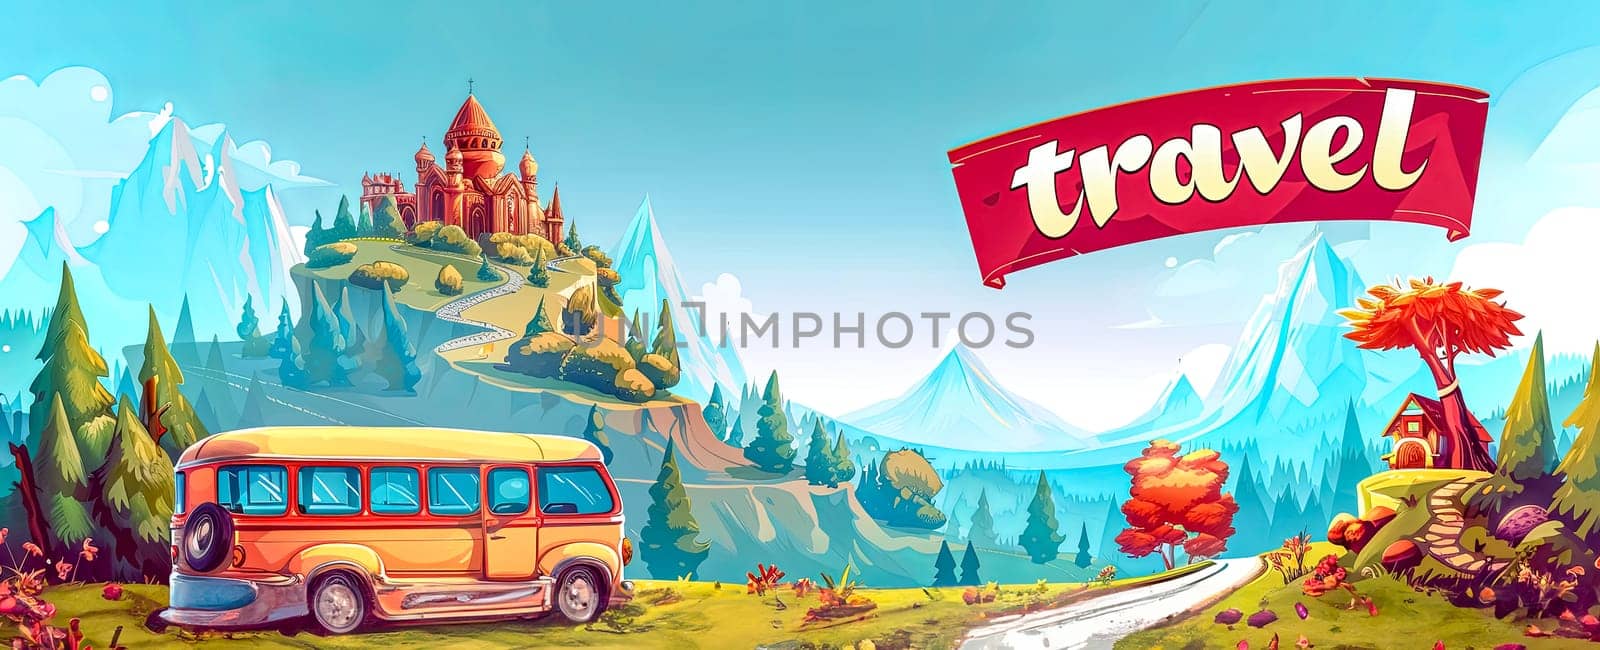 Colorful fantasy landscape with a whimsical travel theme and a vintage bus by Edophoto